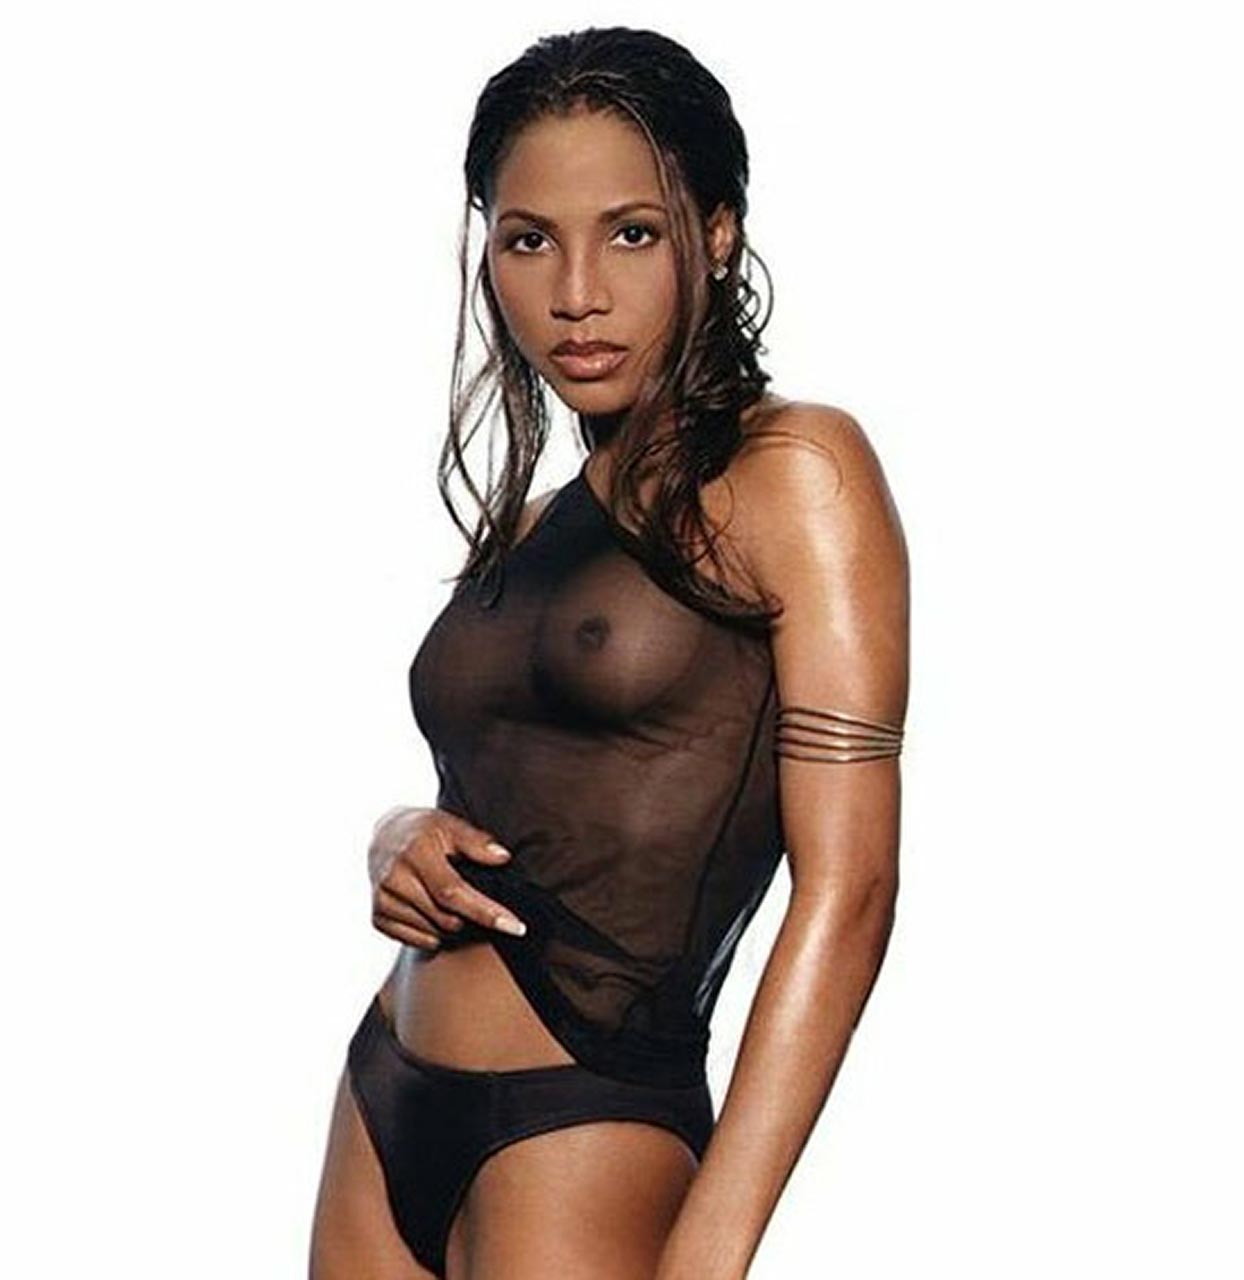 Toni braxton nude pictures